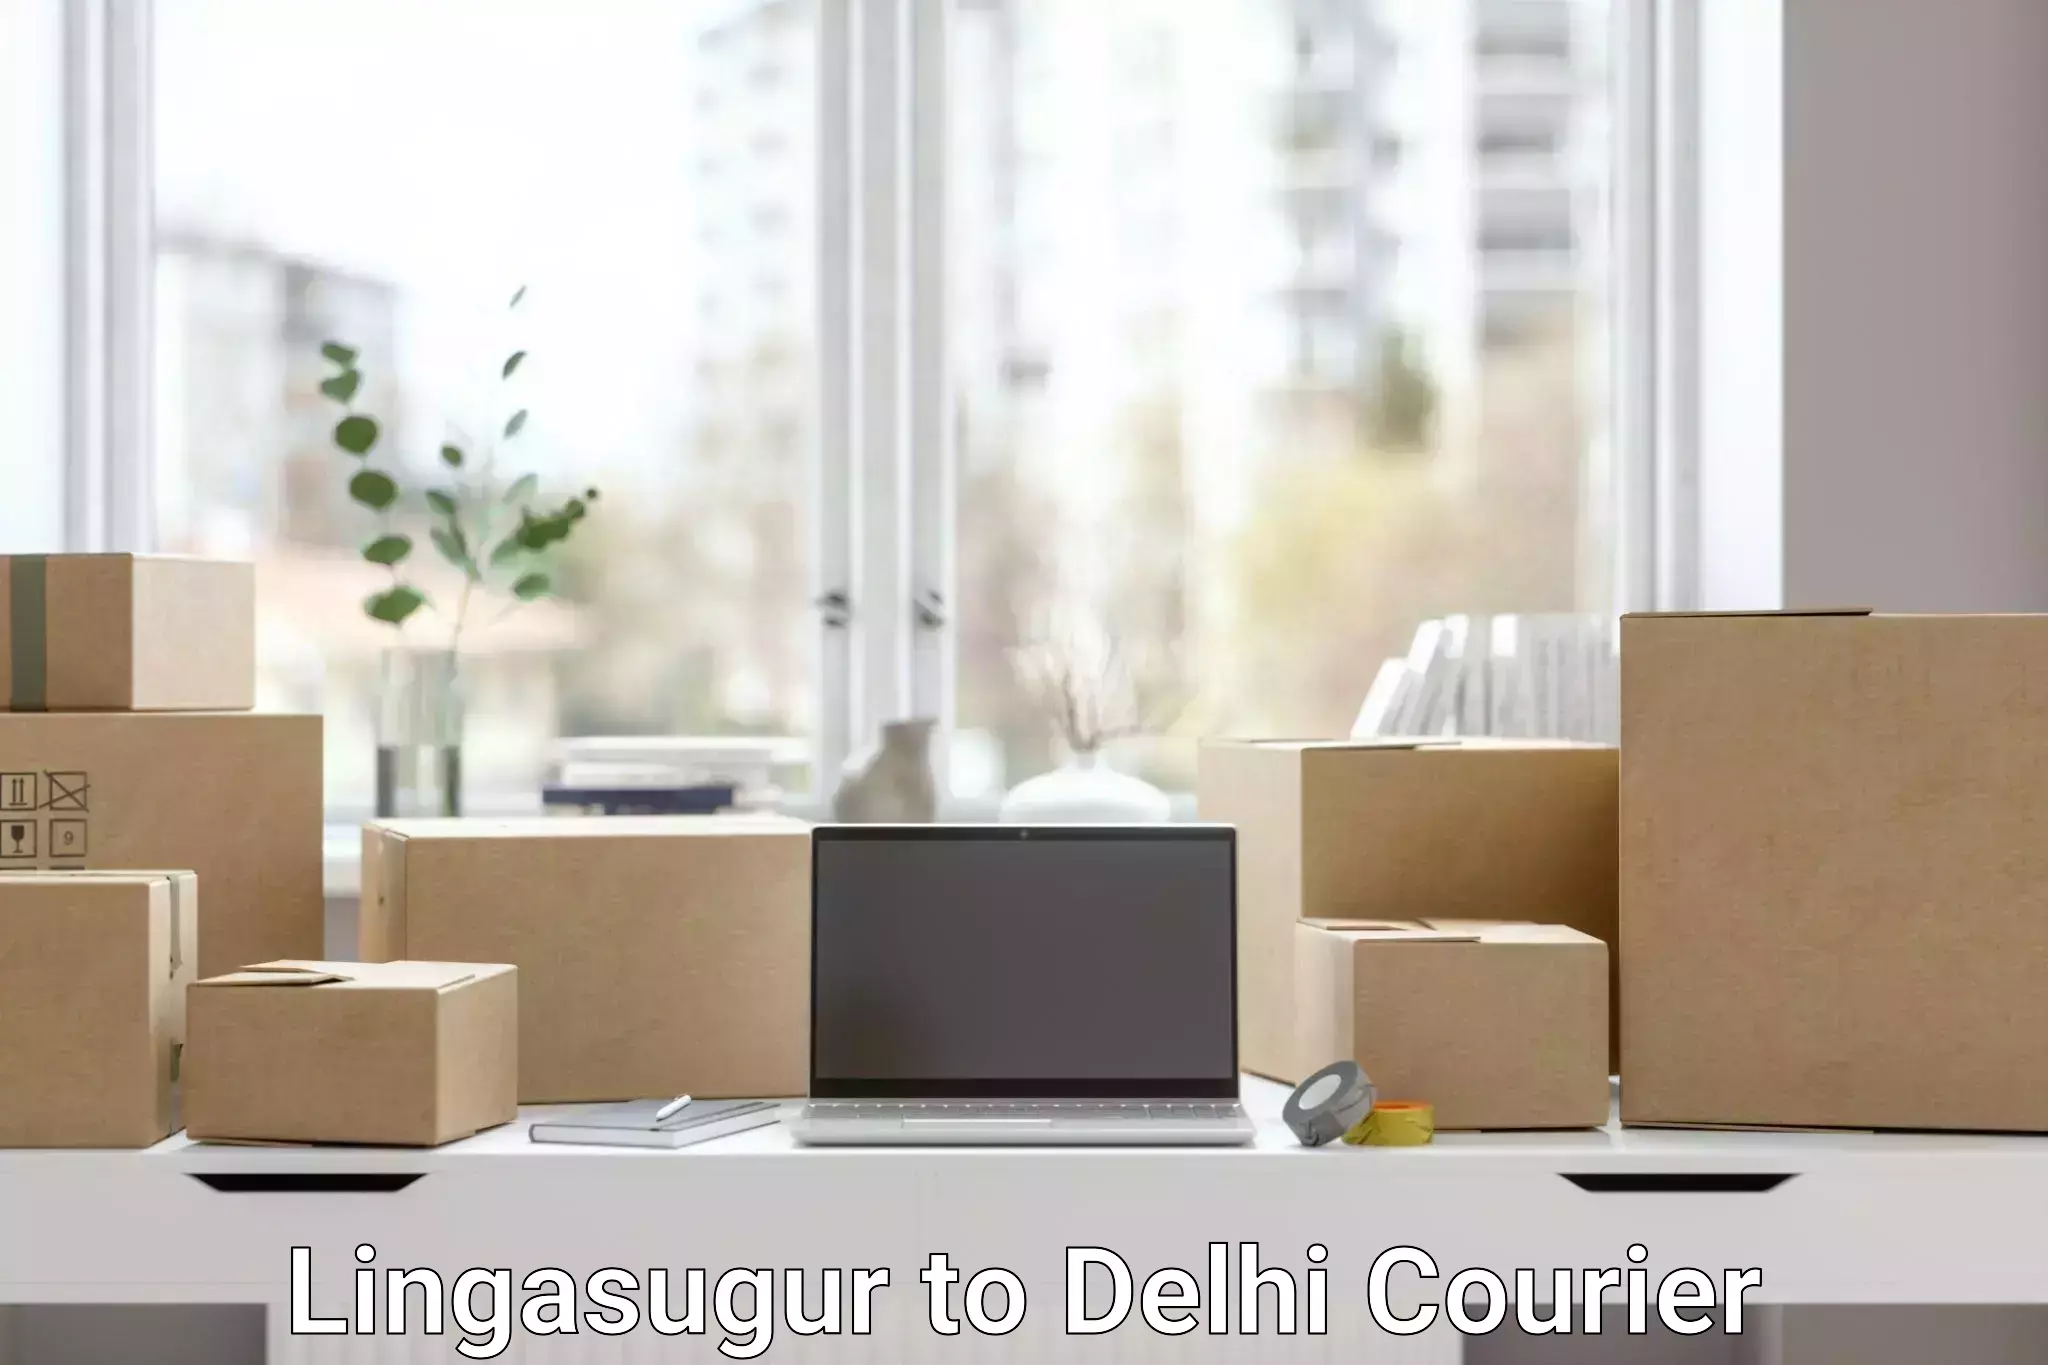 Urgent courier needs in Lingasugur to NCR